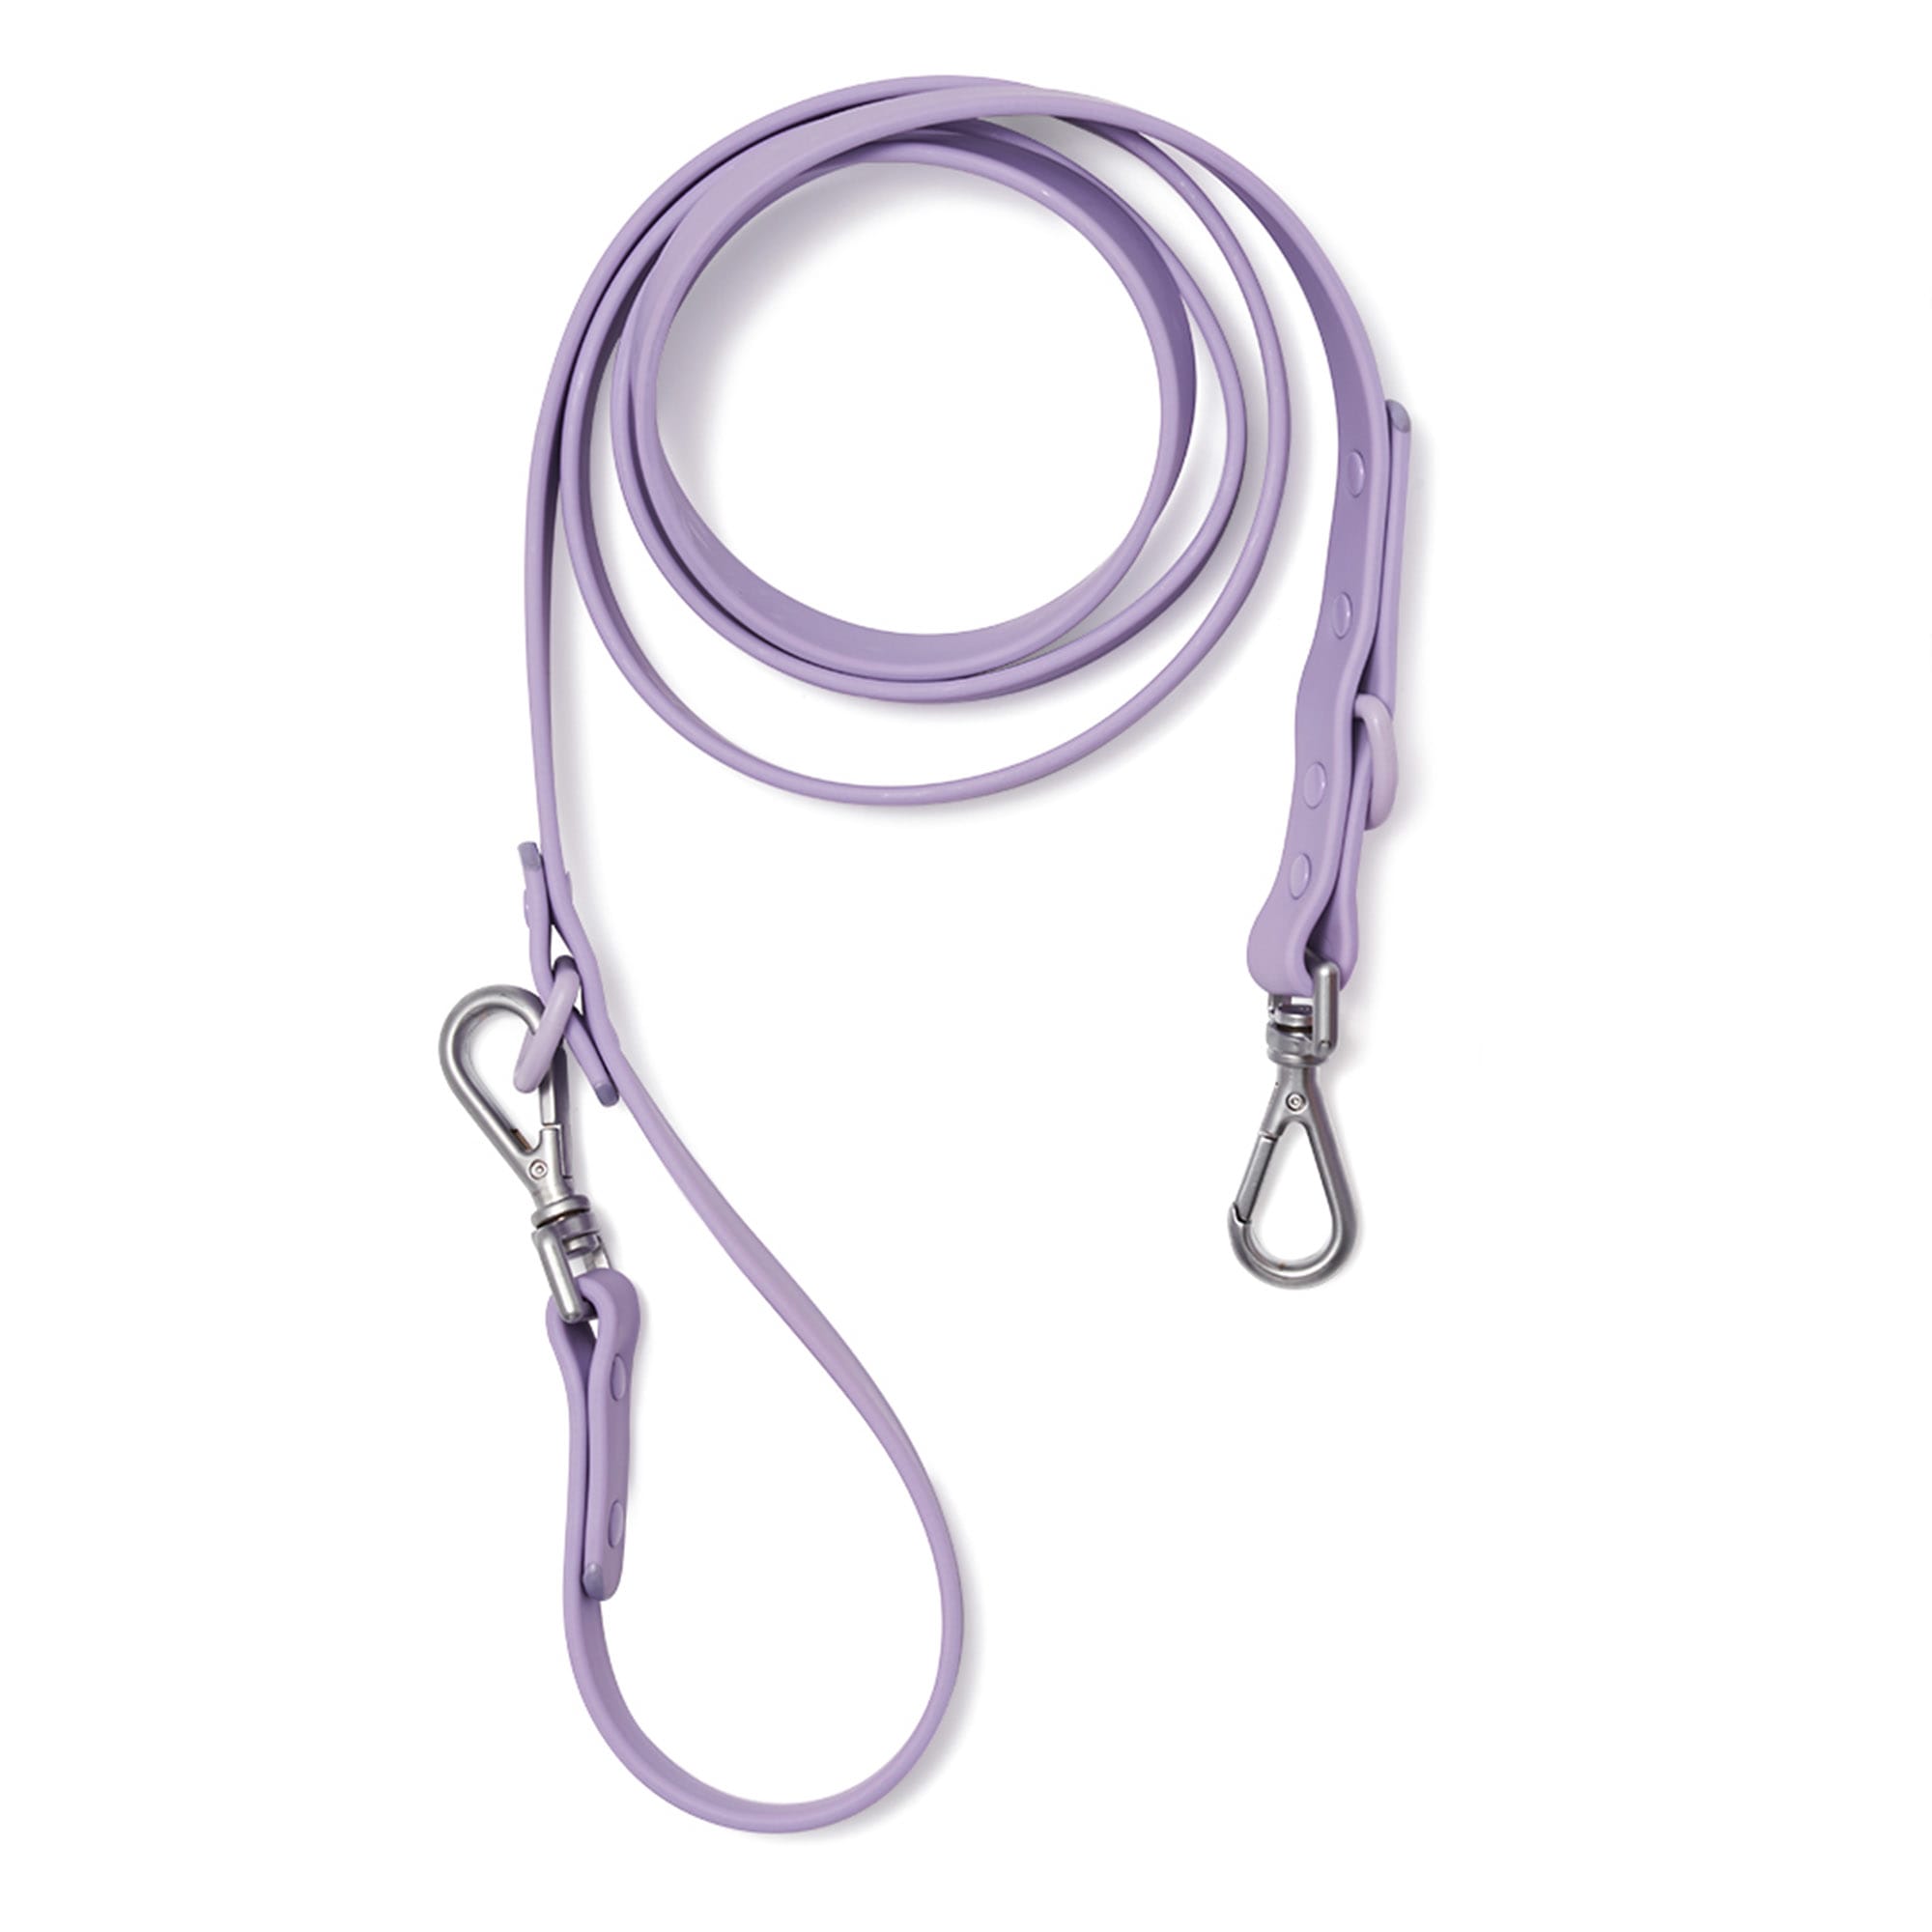 Photos - Collar / Harnesses Wild One Lilac Dog Leash, 66" L, Large, Purple WO-LSH-LIL 